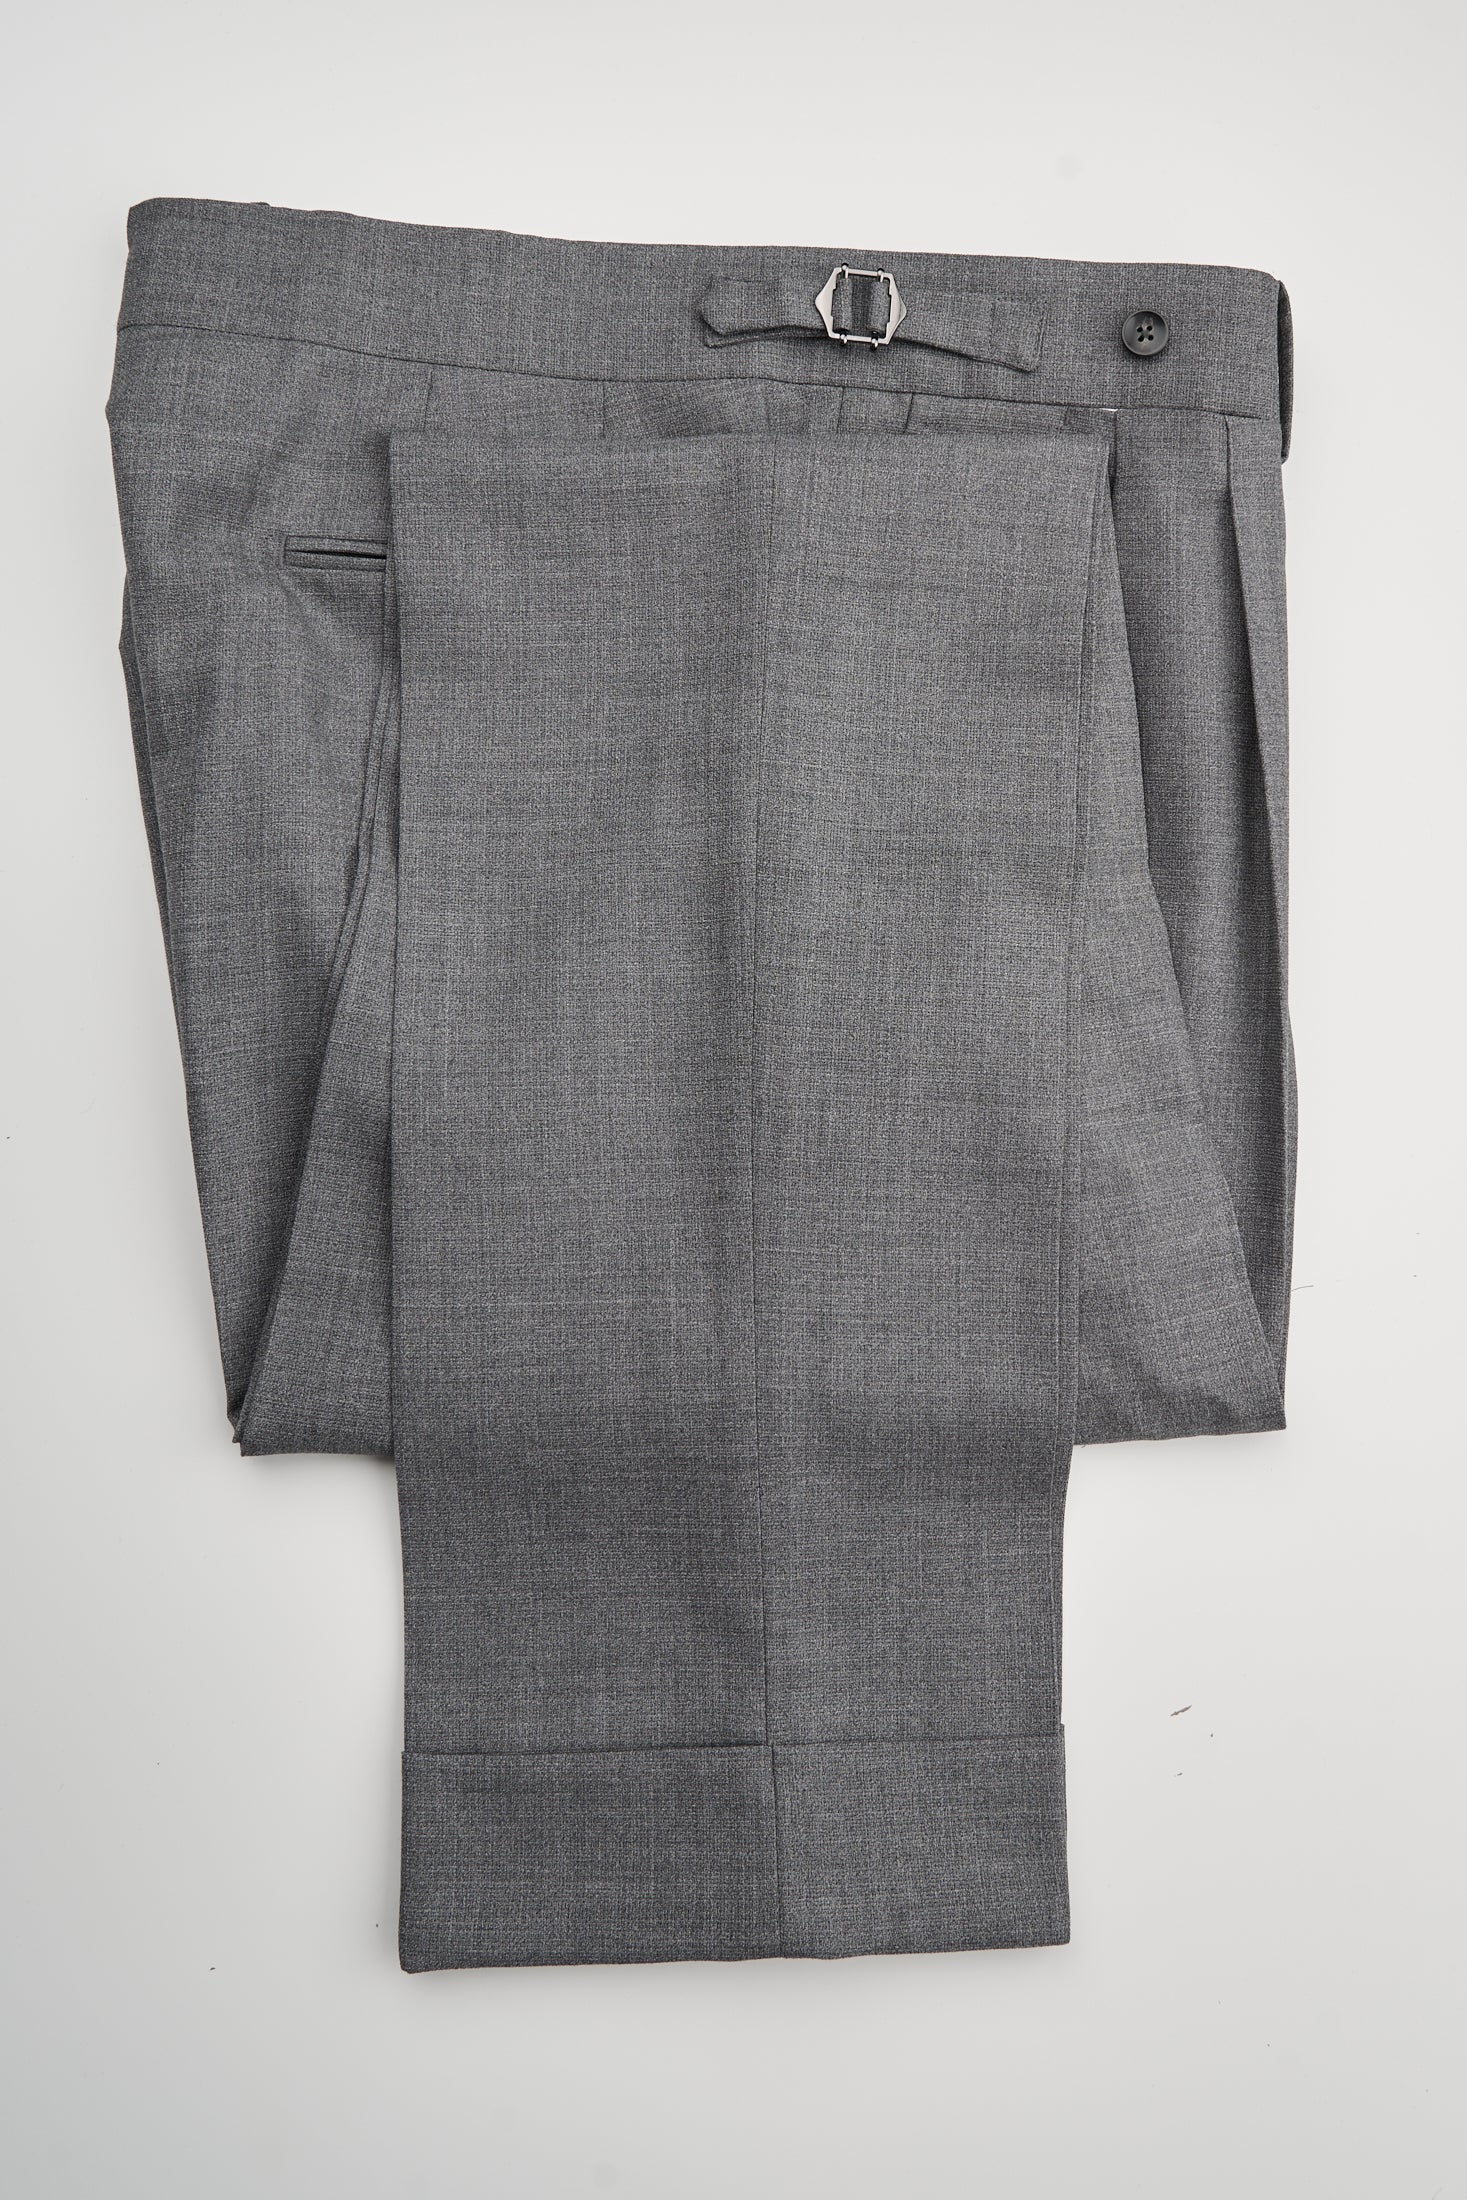 New Suitsupply Braddon Gray Pure Wool Double Pleated Pants - Waist Size 36